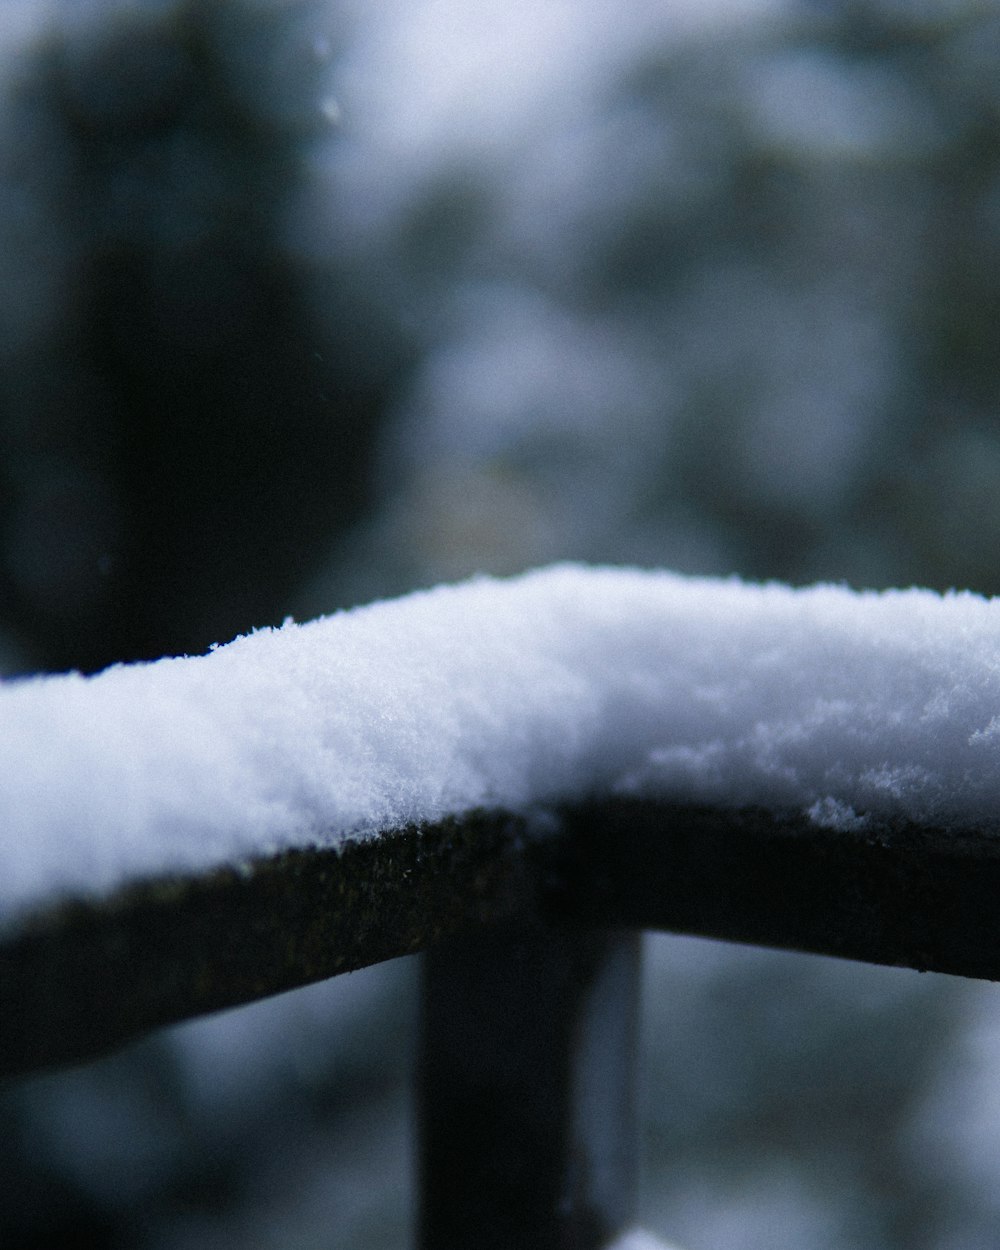 a close up of snow on a metal rail